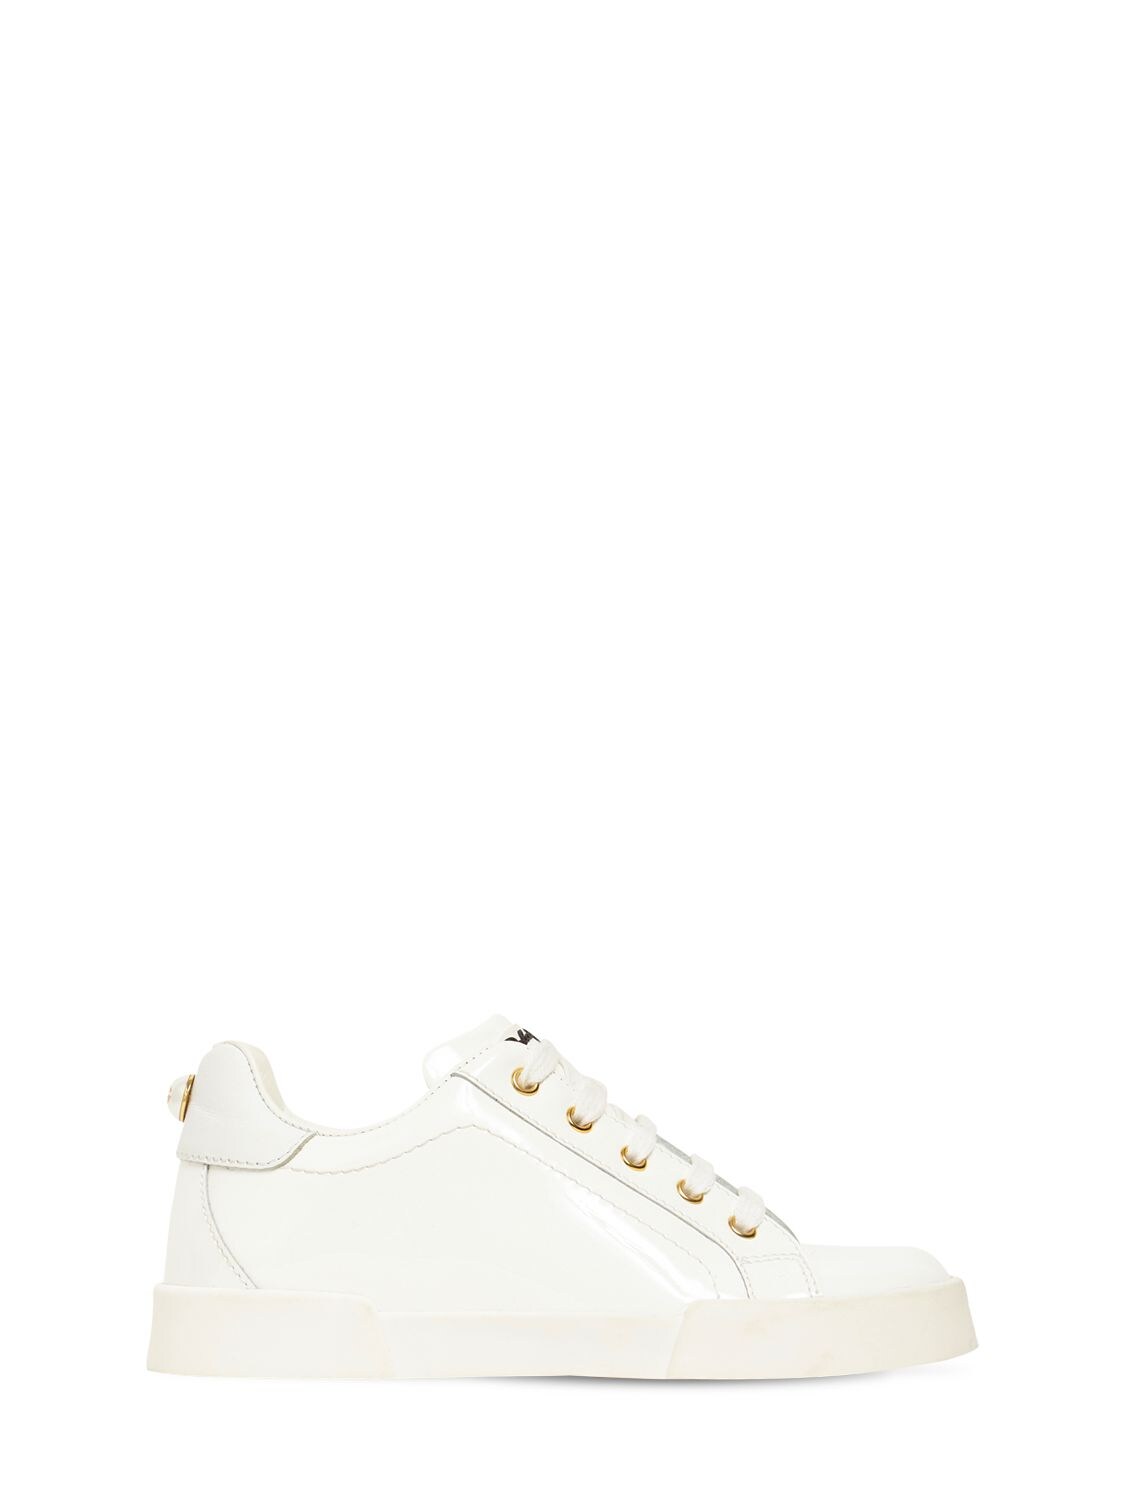 DOLCE & GABBANA PATENT LEATHER LACE-UP SNEAKERS,72I8YQ026-ODAWMDE1